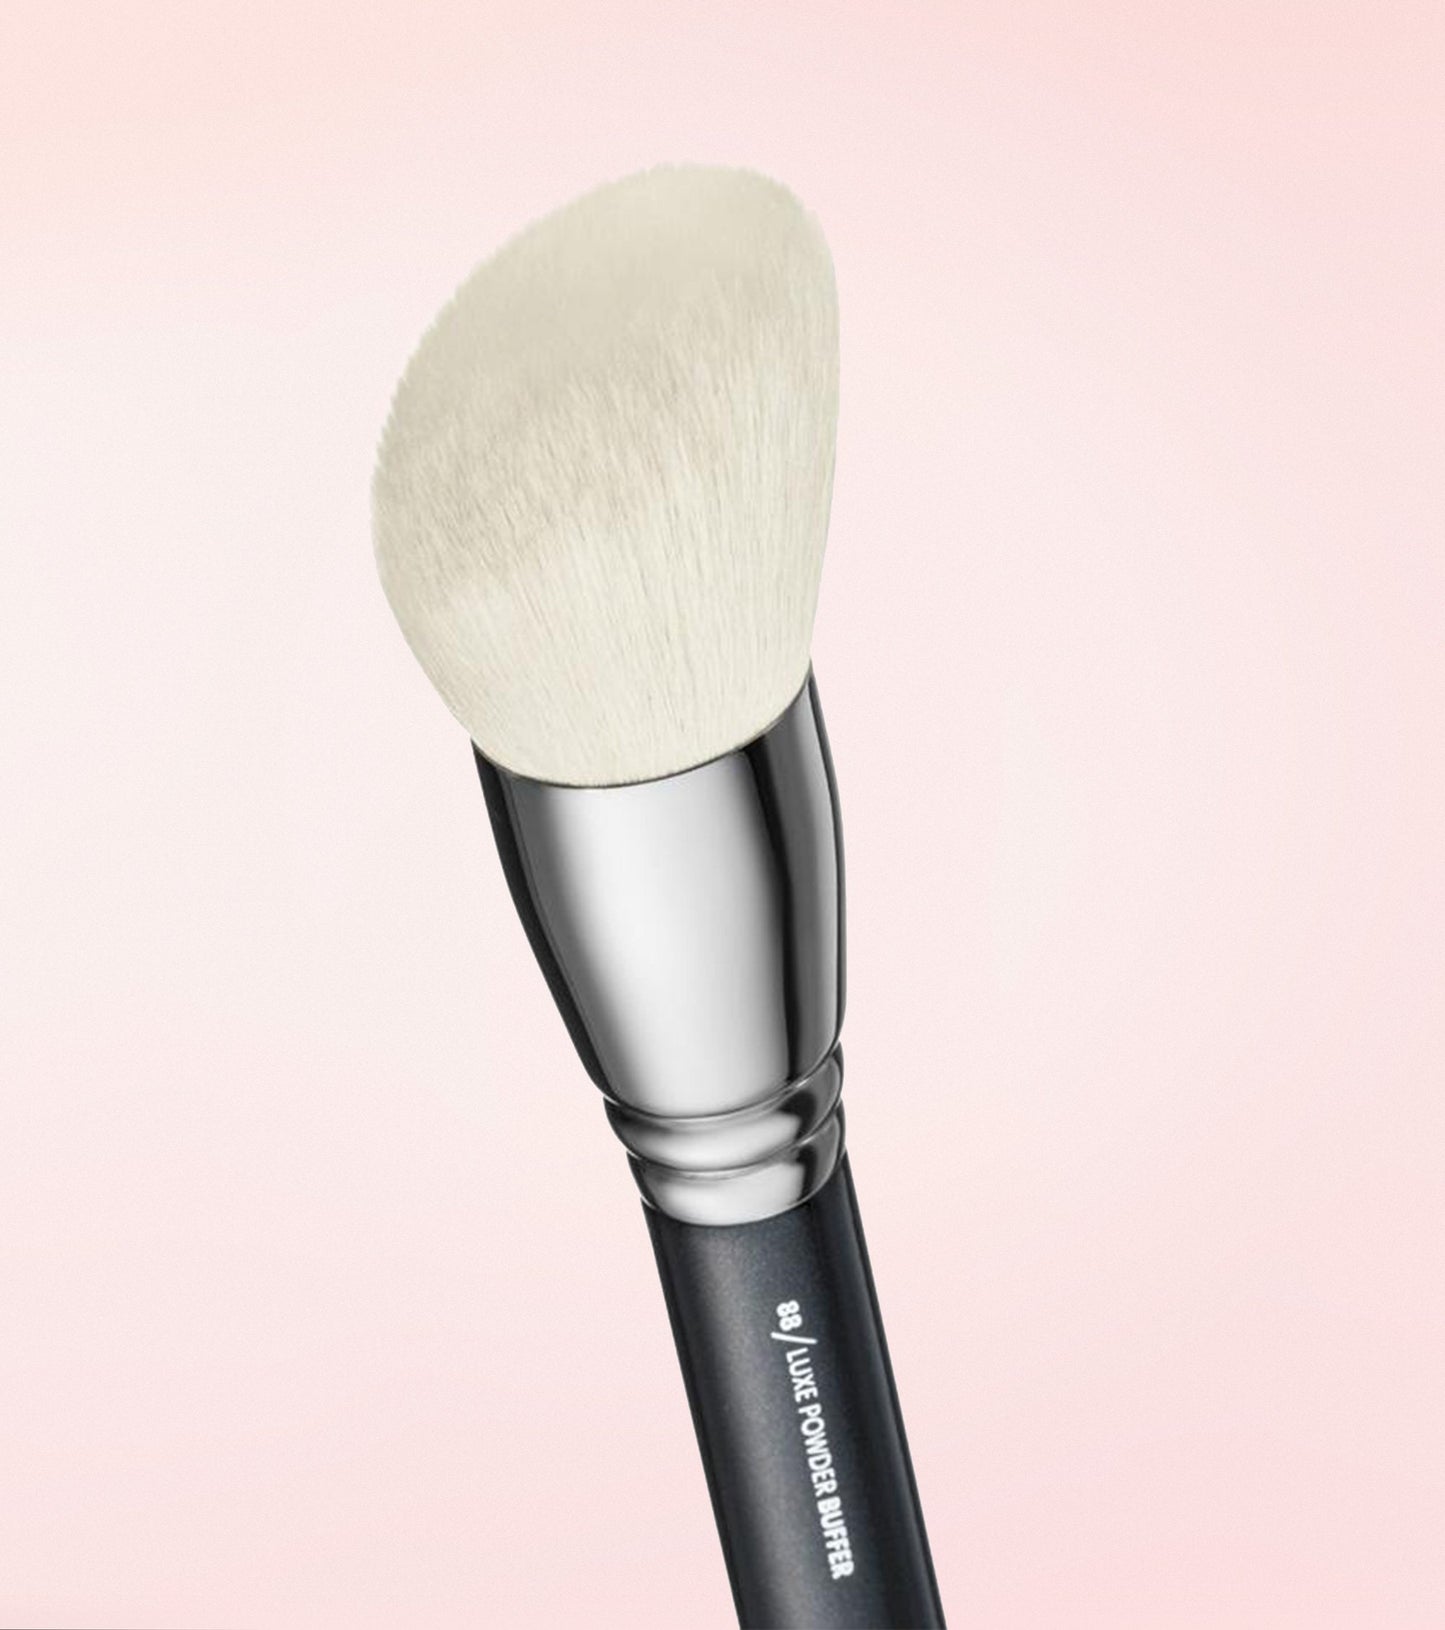 088 Luxe Powder Buffer Brush GIFT Expanded Image 2